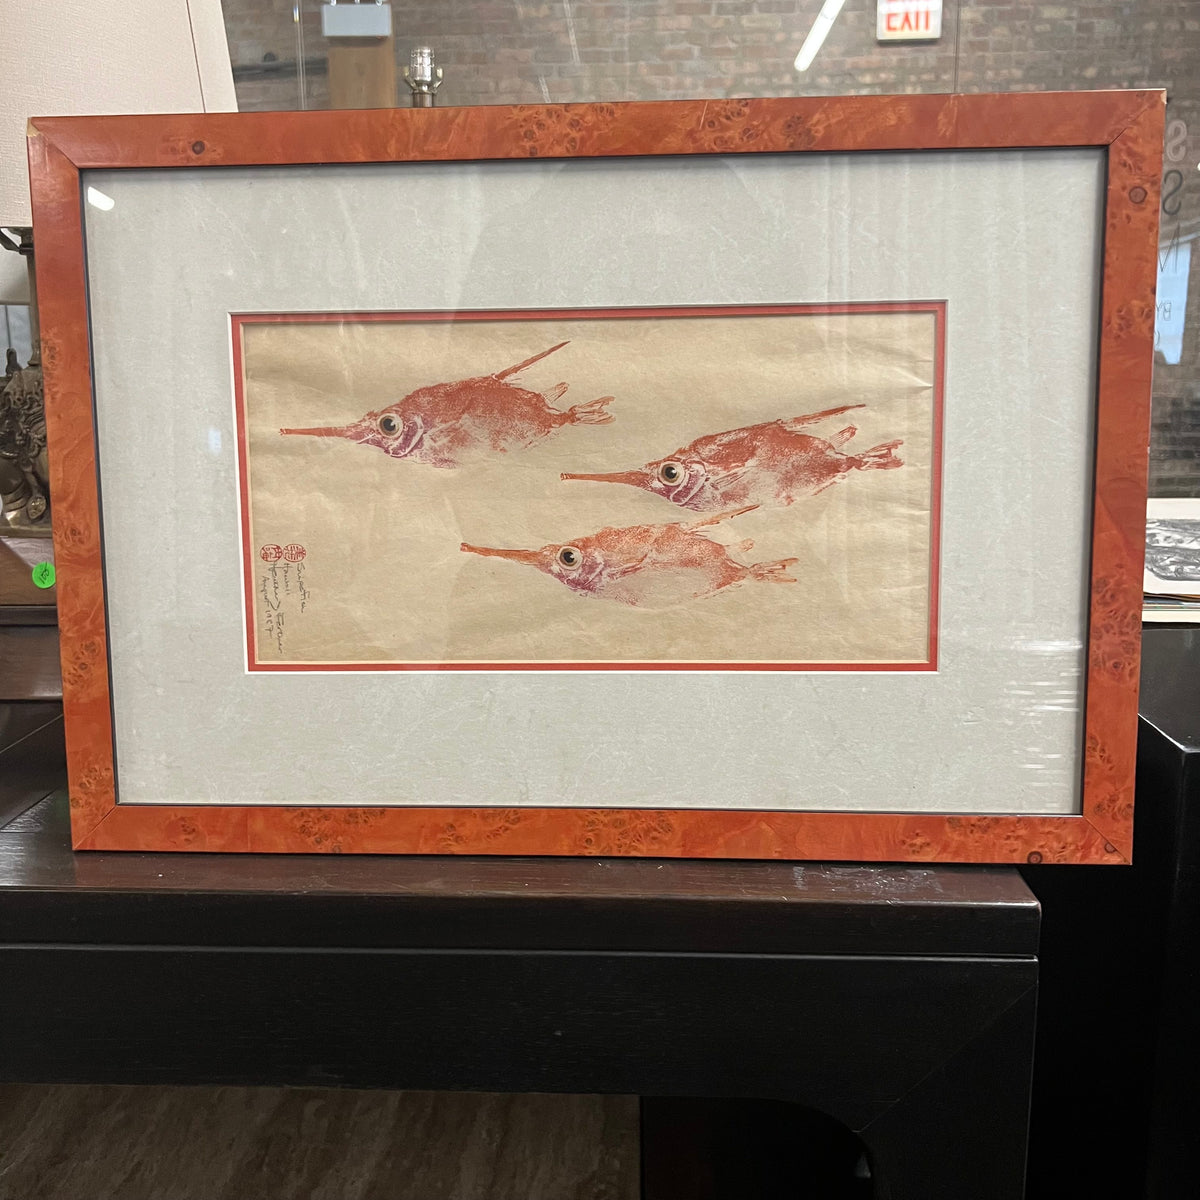 Lovely framed and matted print of three snipe fish by artist Heather Fortner.  Signed and dated 1987.  Done is lovely shades of oranges and reds.  Beautifully framed and matted.  Coastal Decor.  Original art.